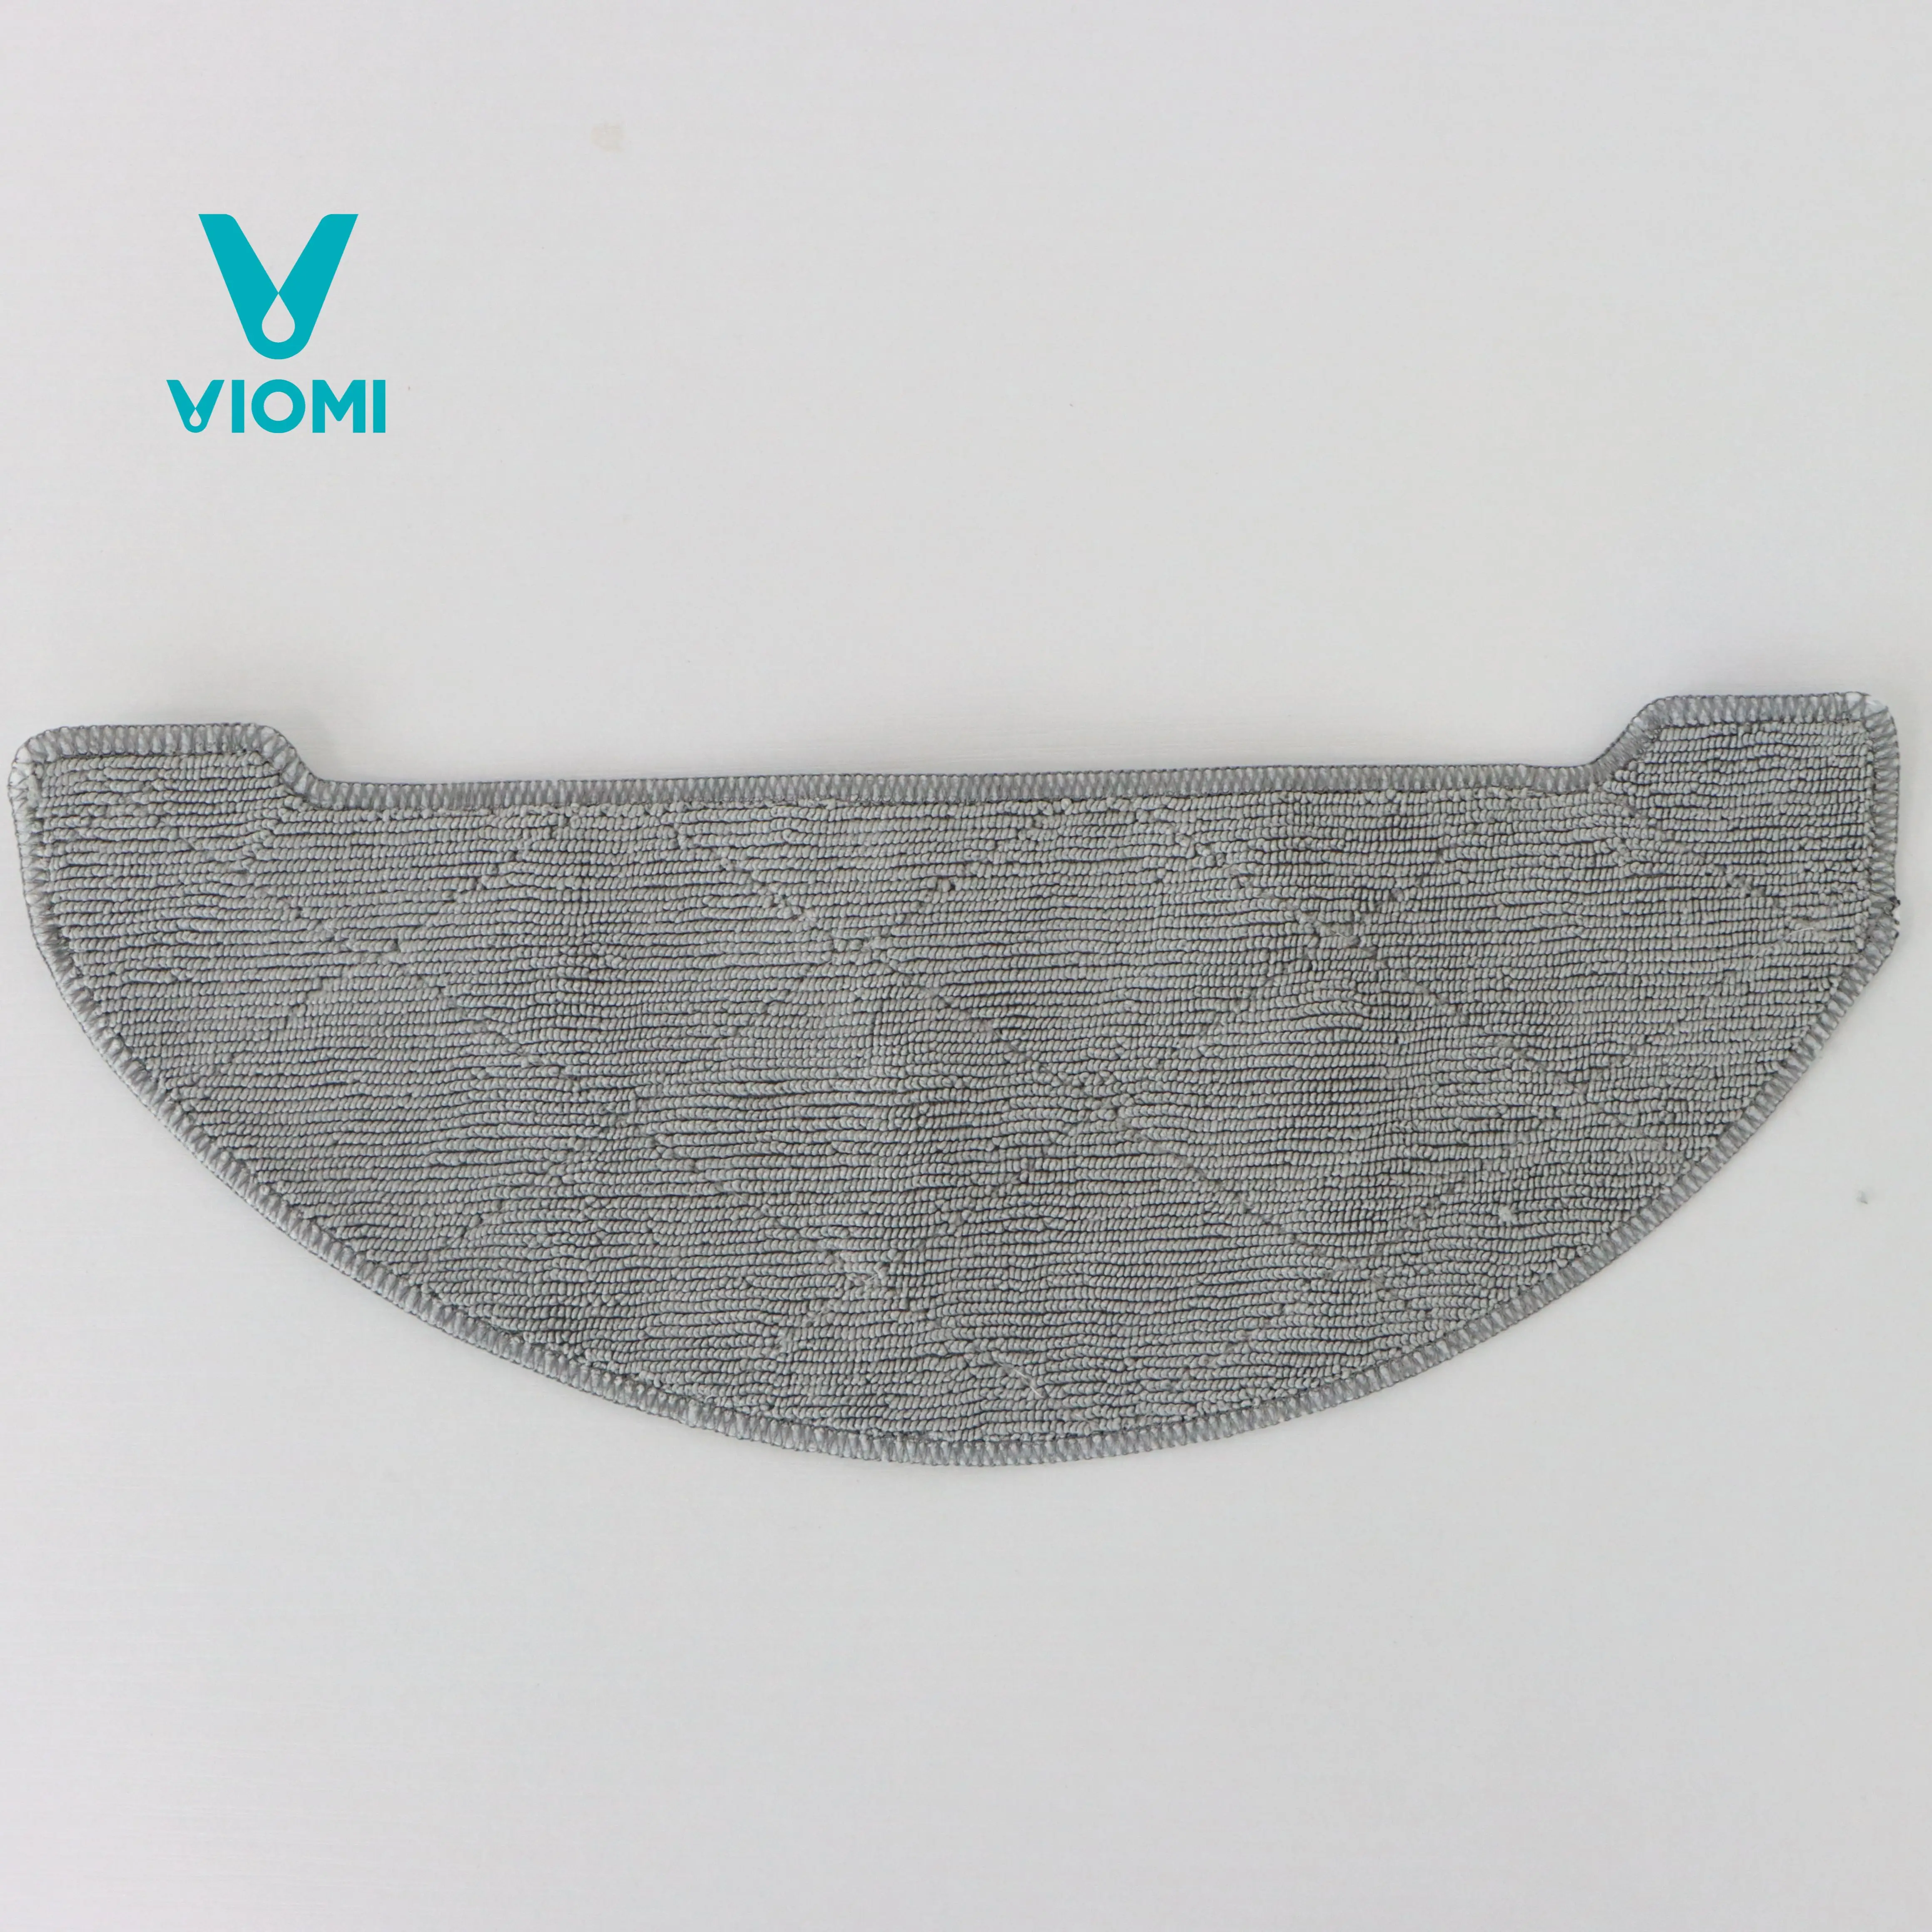 For VIOMI S9 Vacuum Cleaner Accessories Side Brush Filter Mop Cloth Dust Bag HUY 